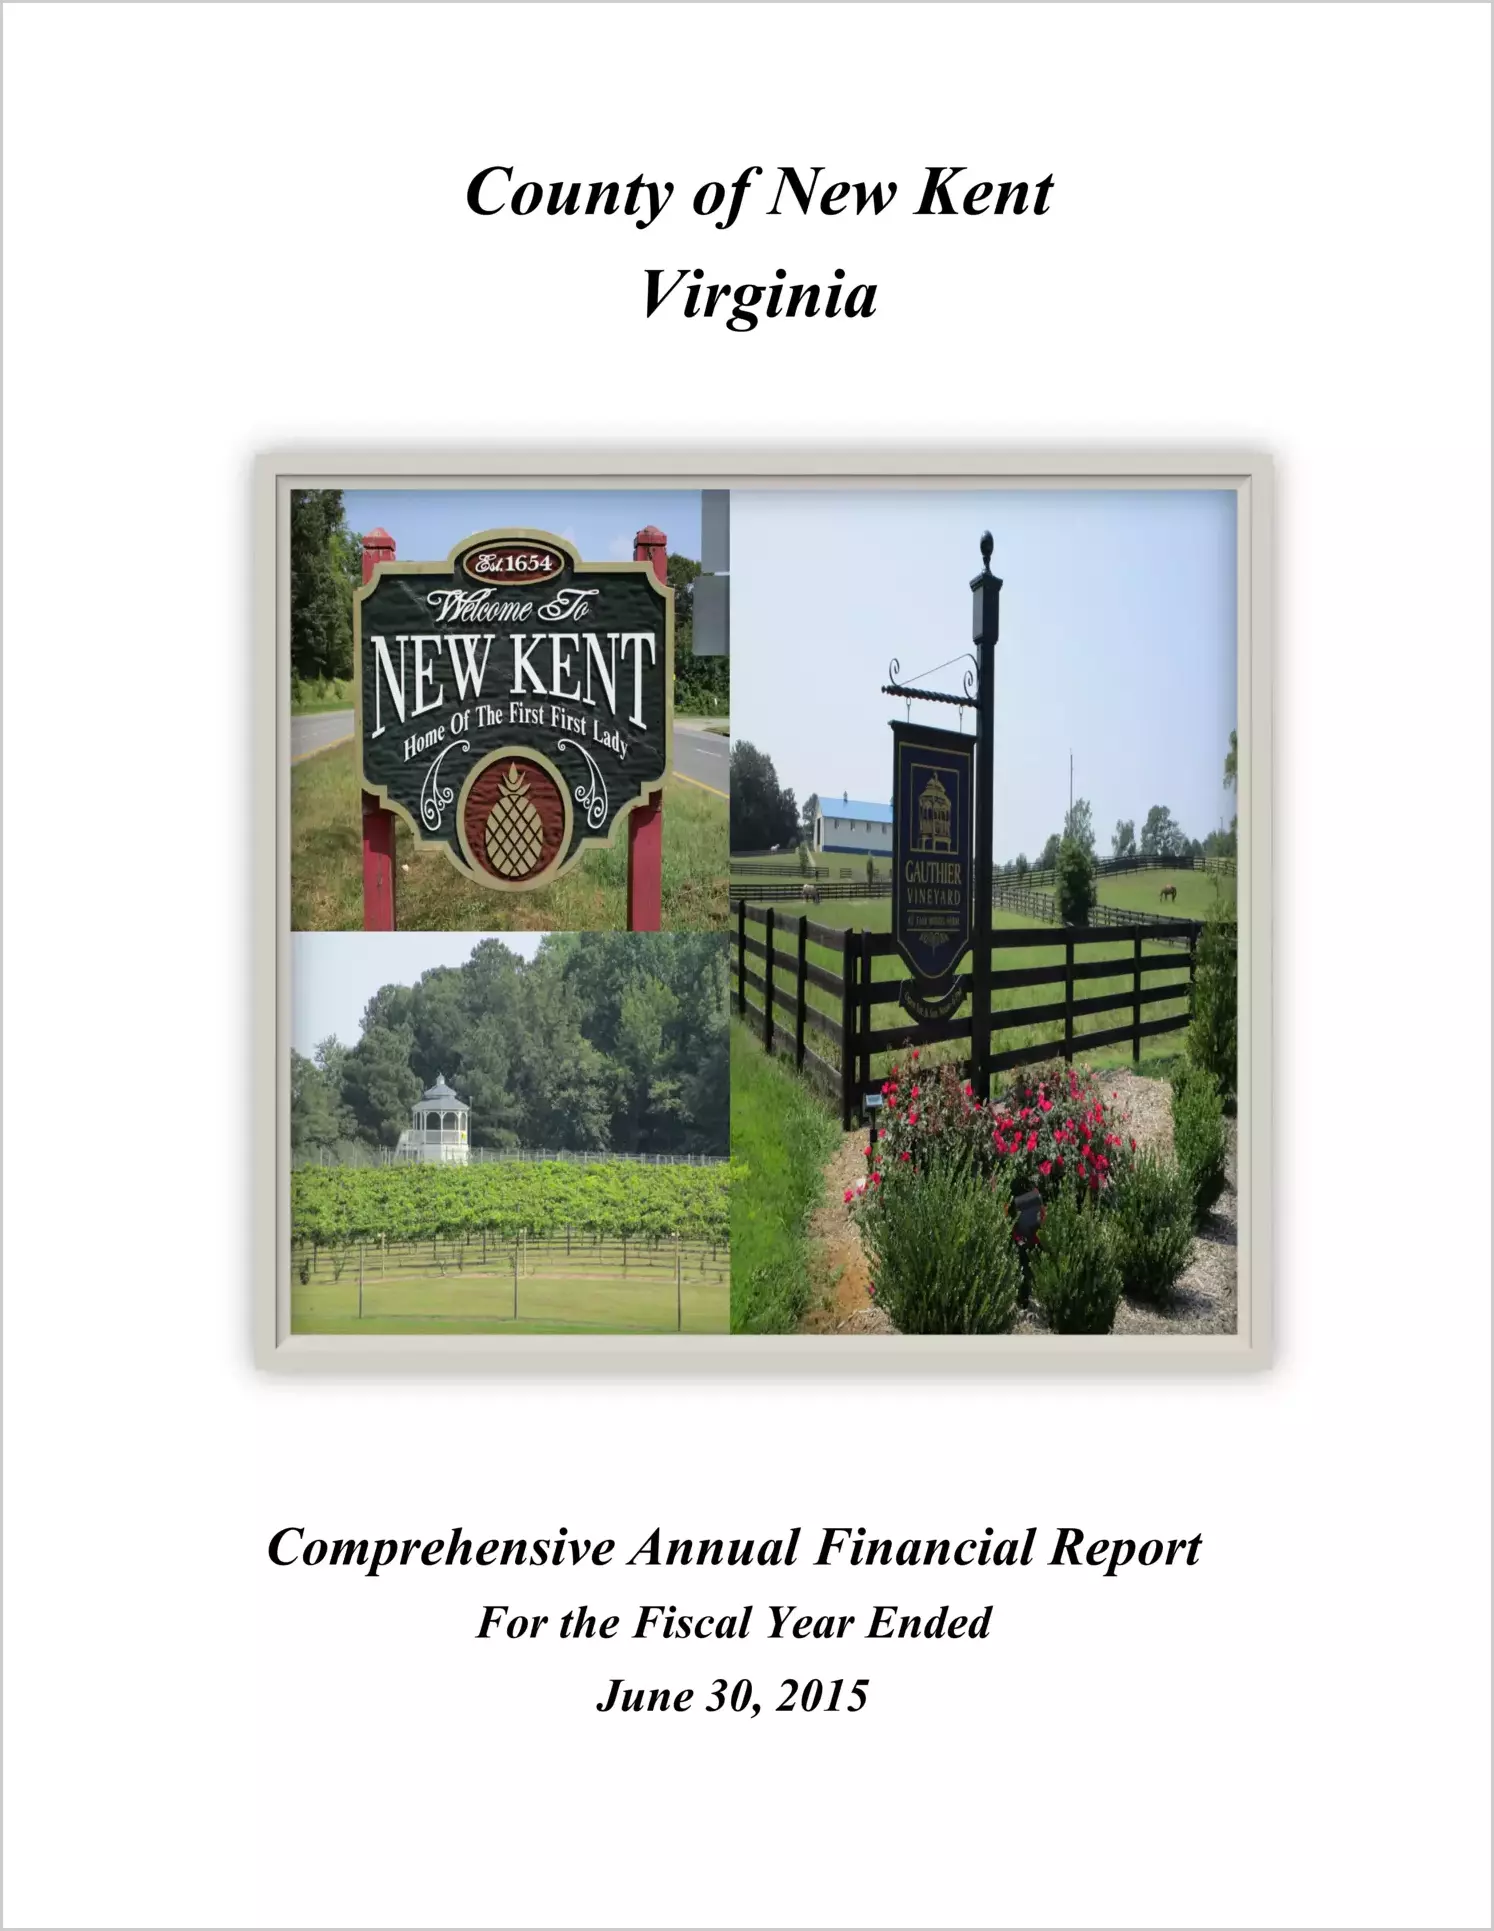 2015 Annual Financial Report for County of New Kent